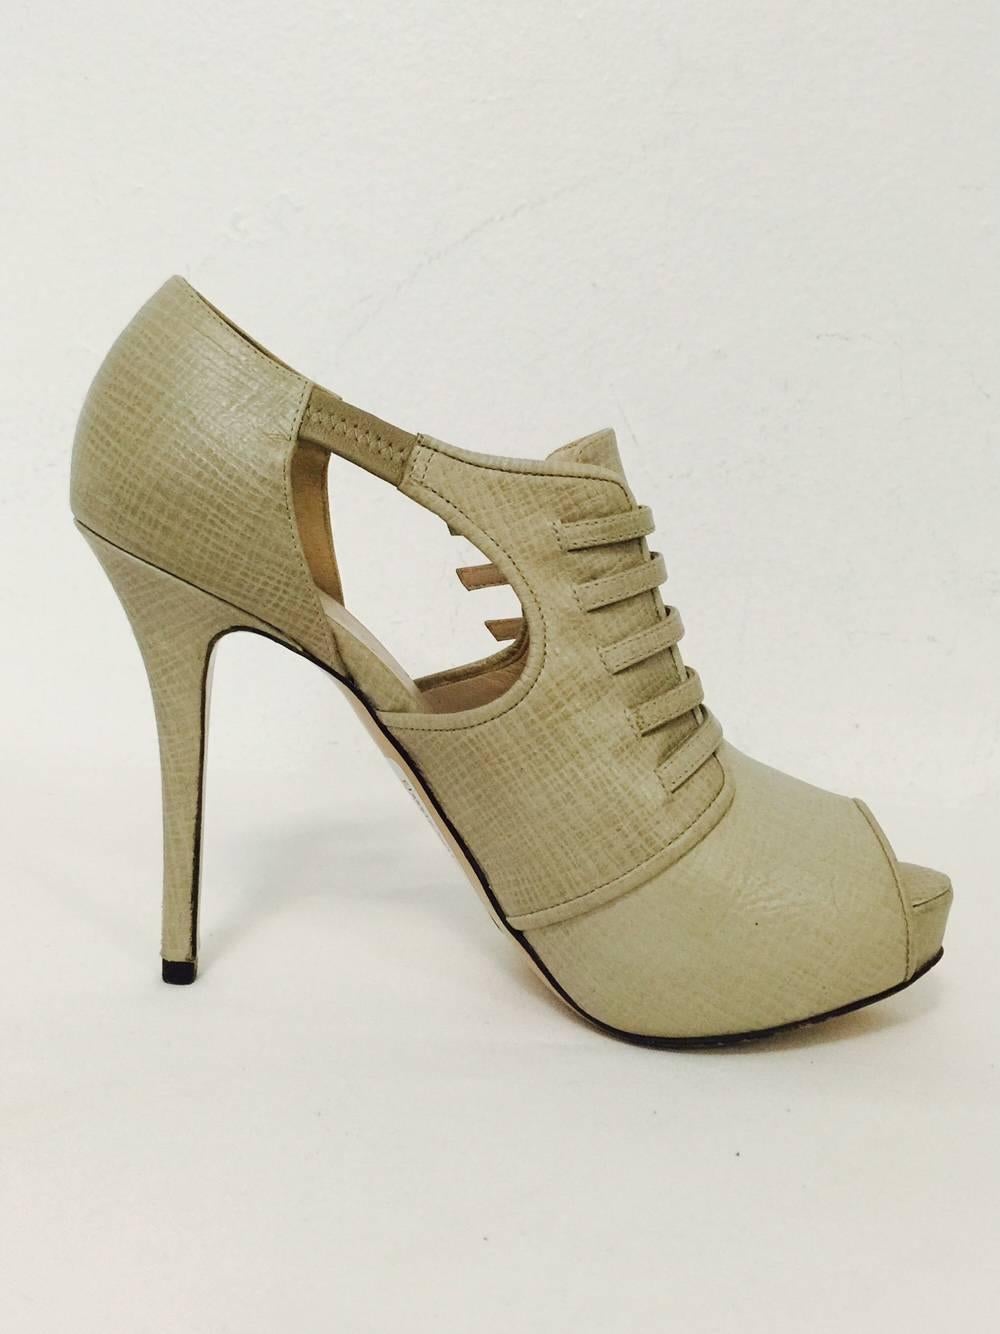 Edgy Escada Textured Leather Buckled High Heel Shooties  In Excellent Condition For Sale In Palm Beach, FL